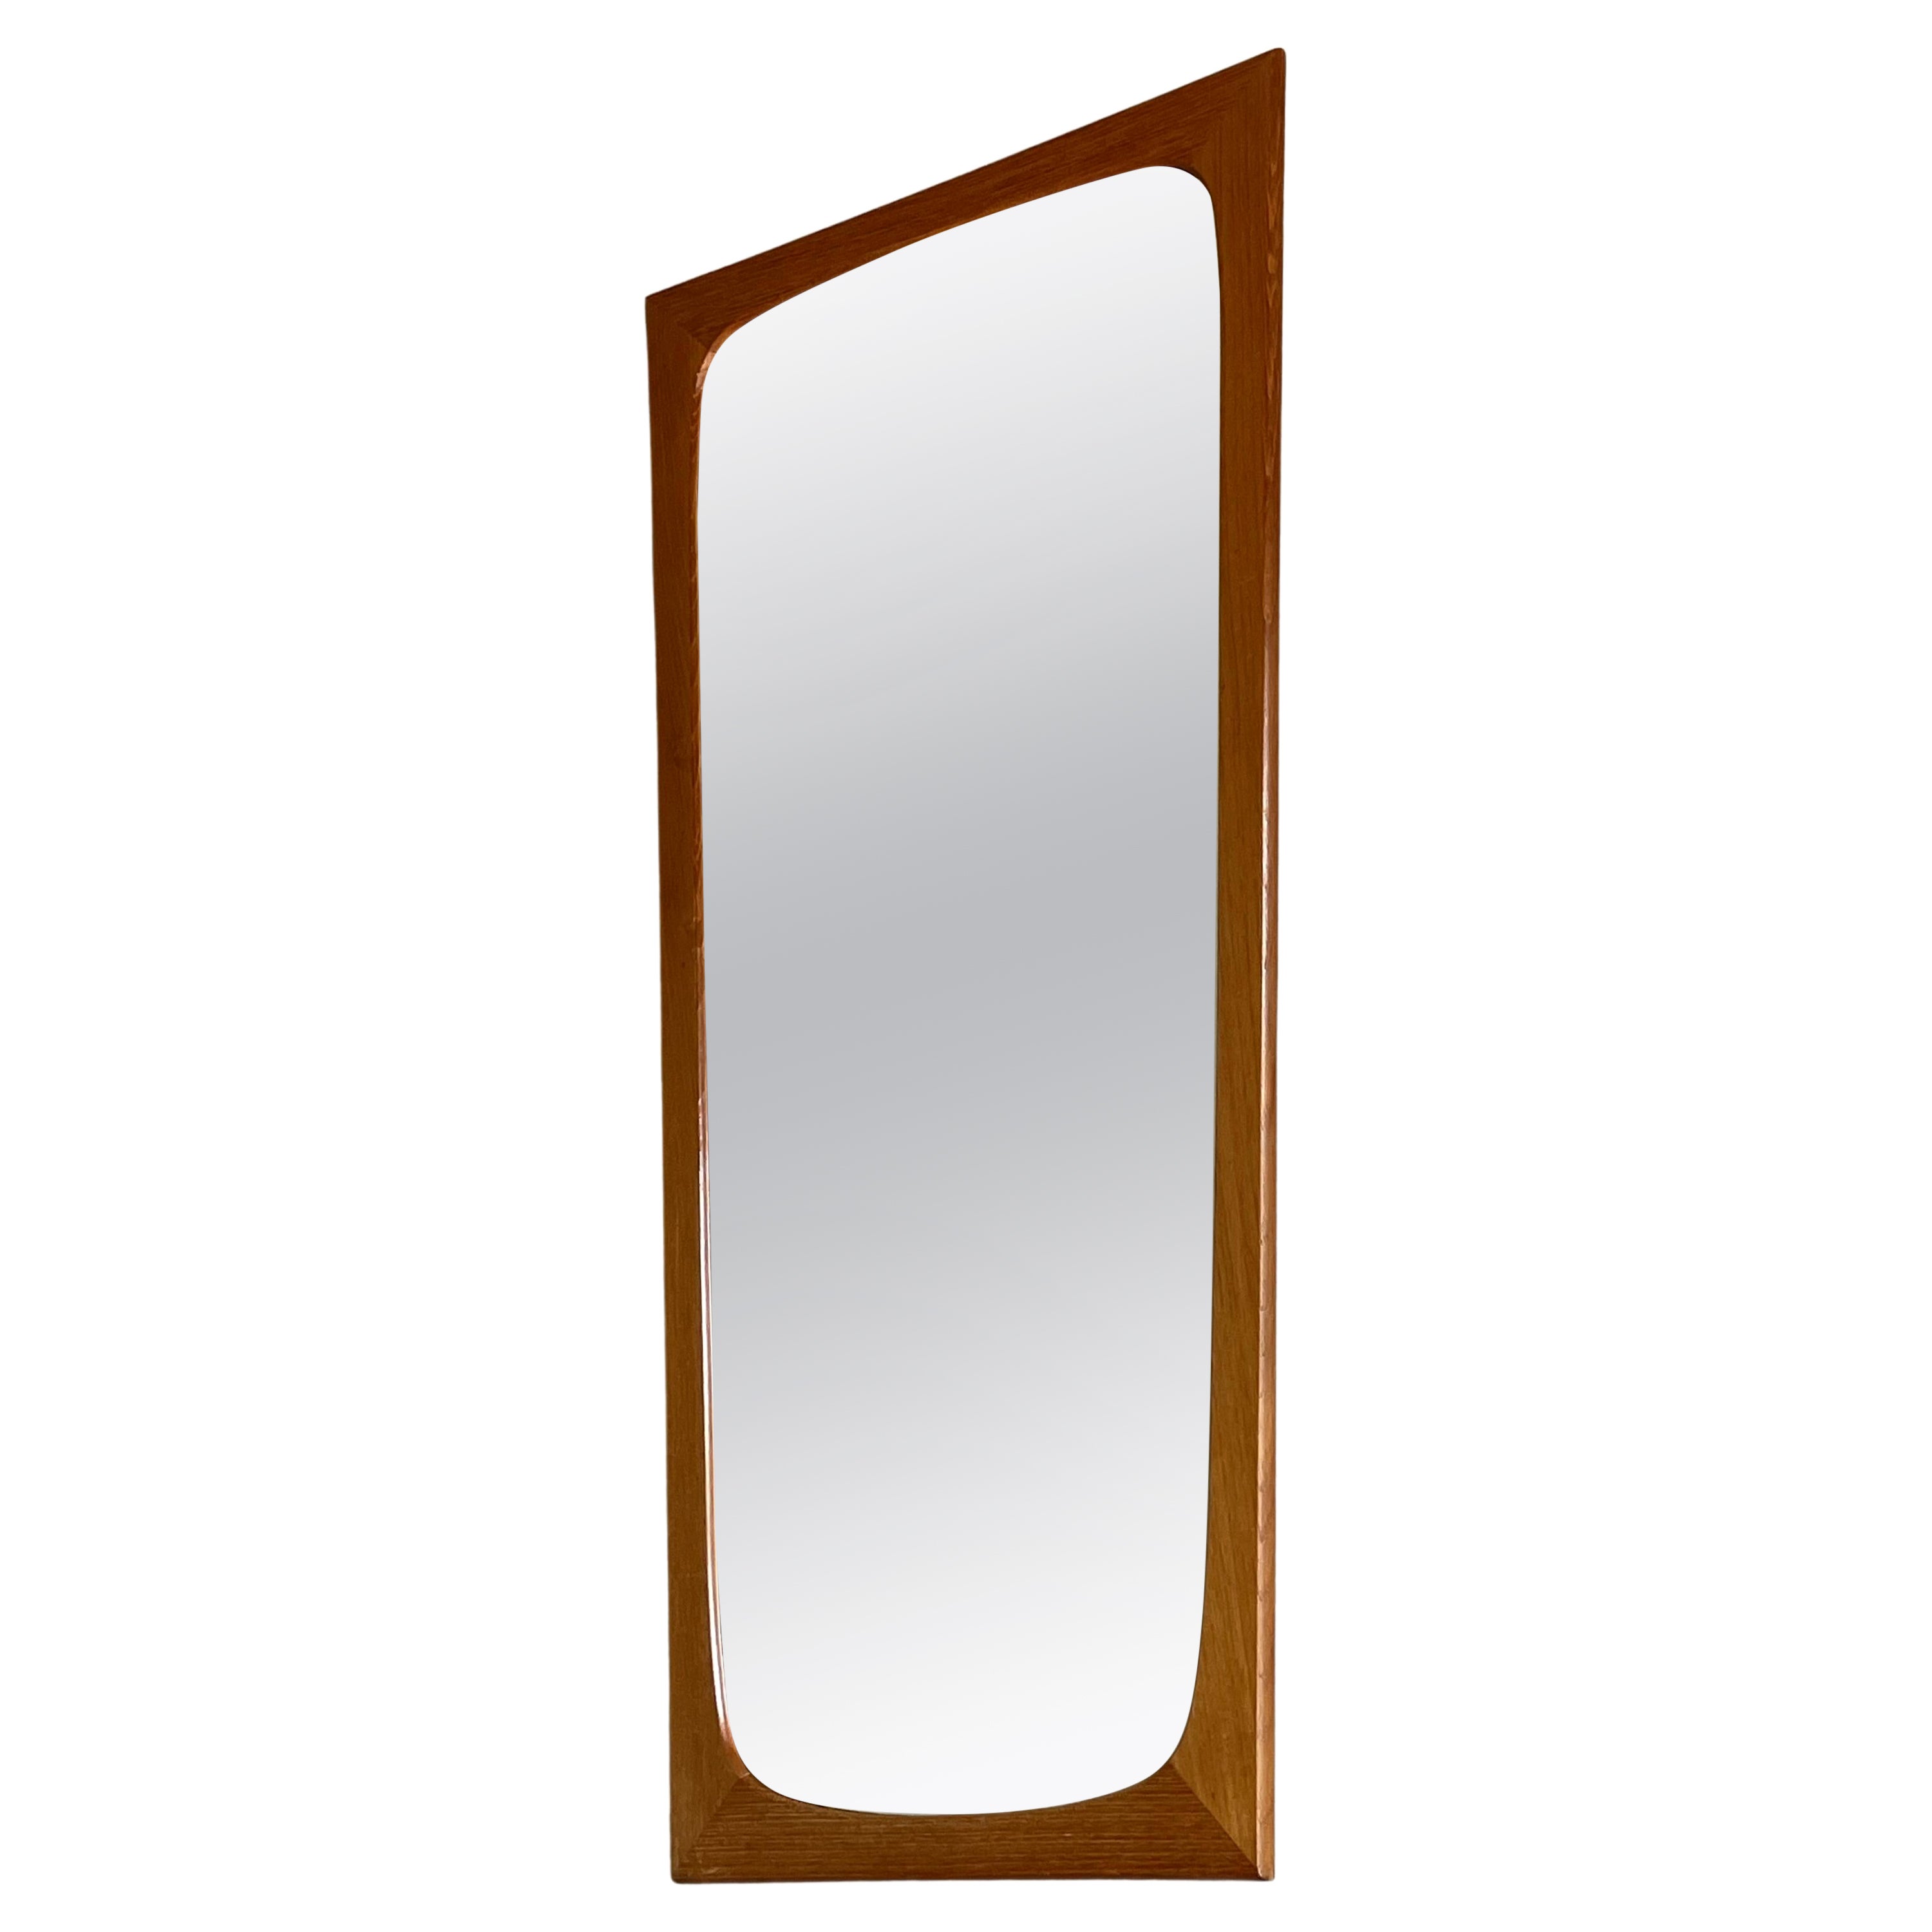 Rare Mid-Century Modern Wall / Make Up Mirror in Superb Teak Wooden Frame 1960s For Sale